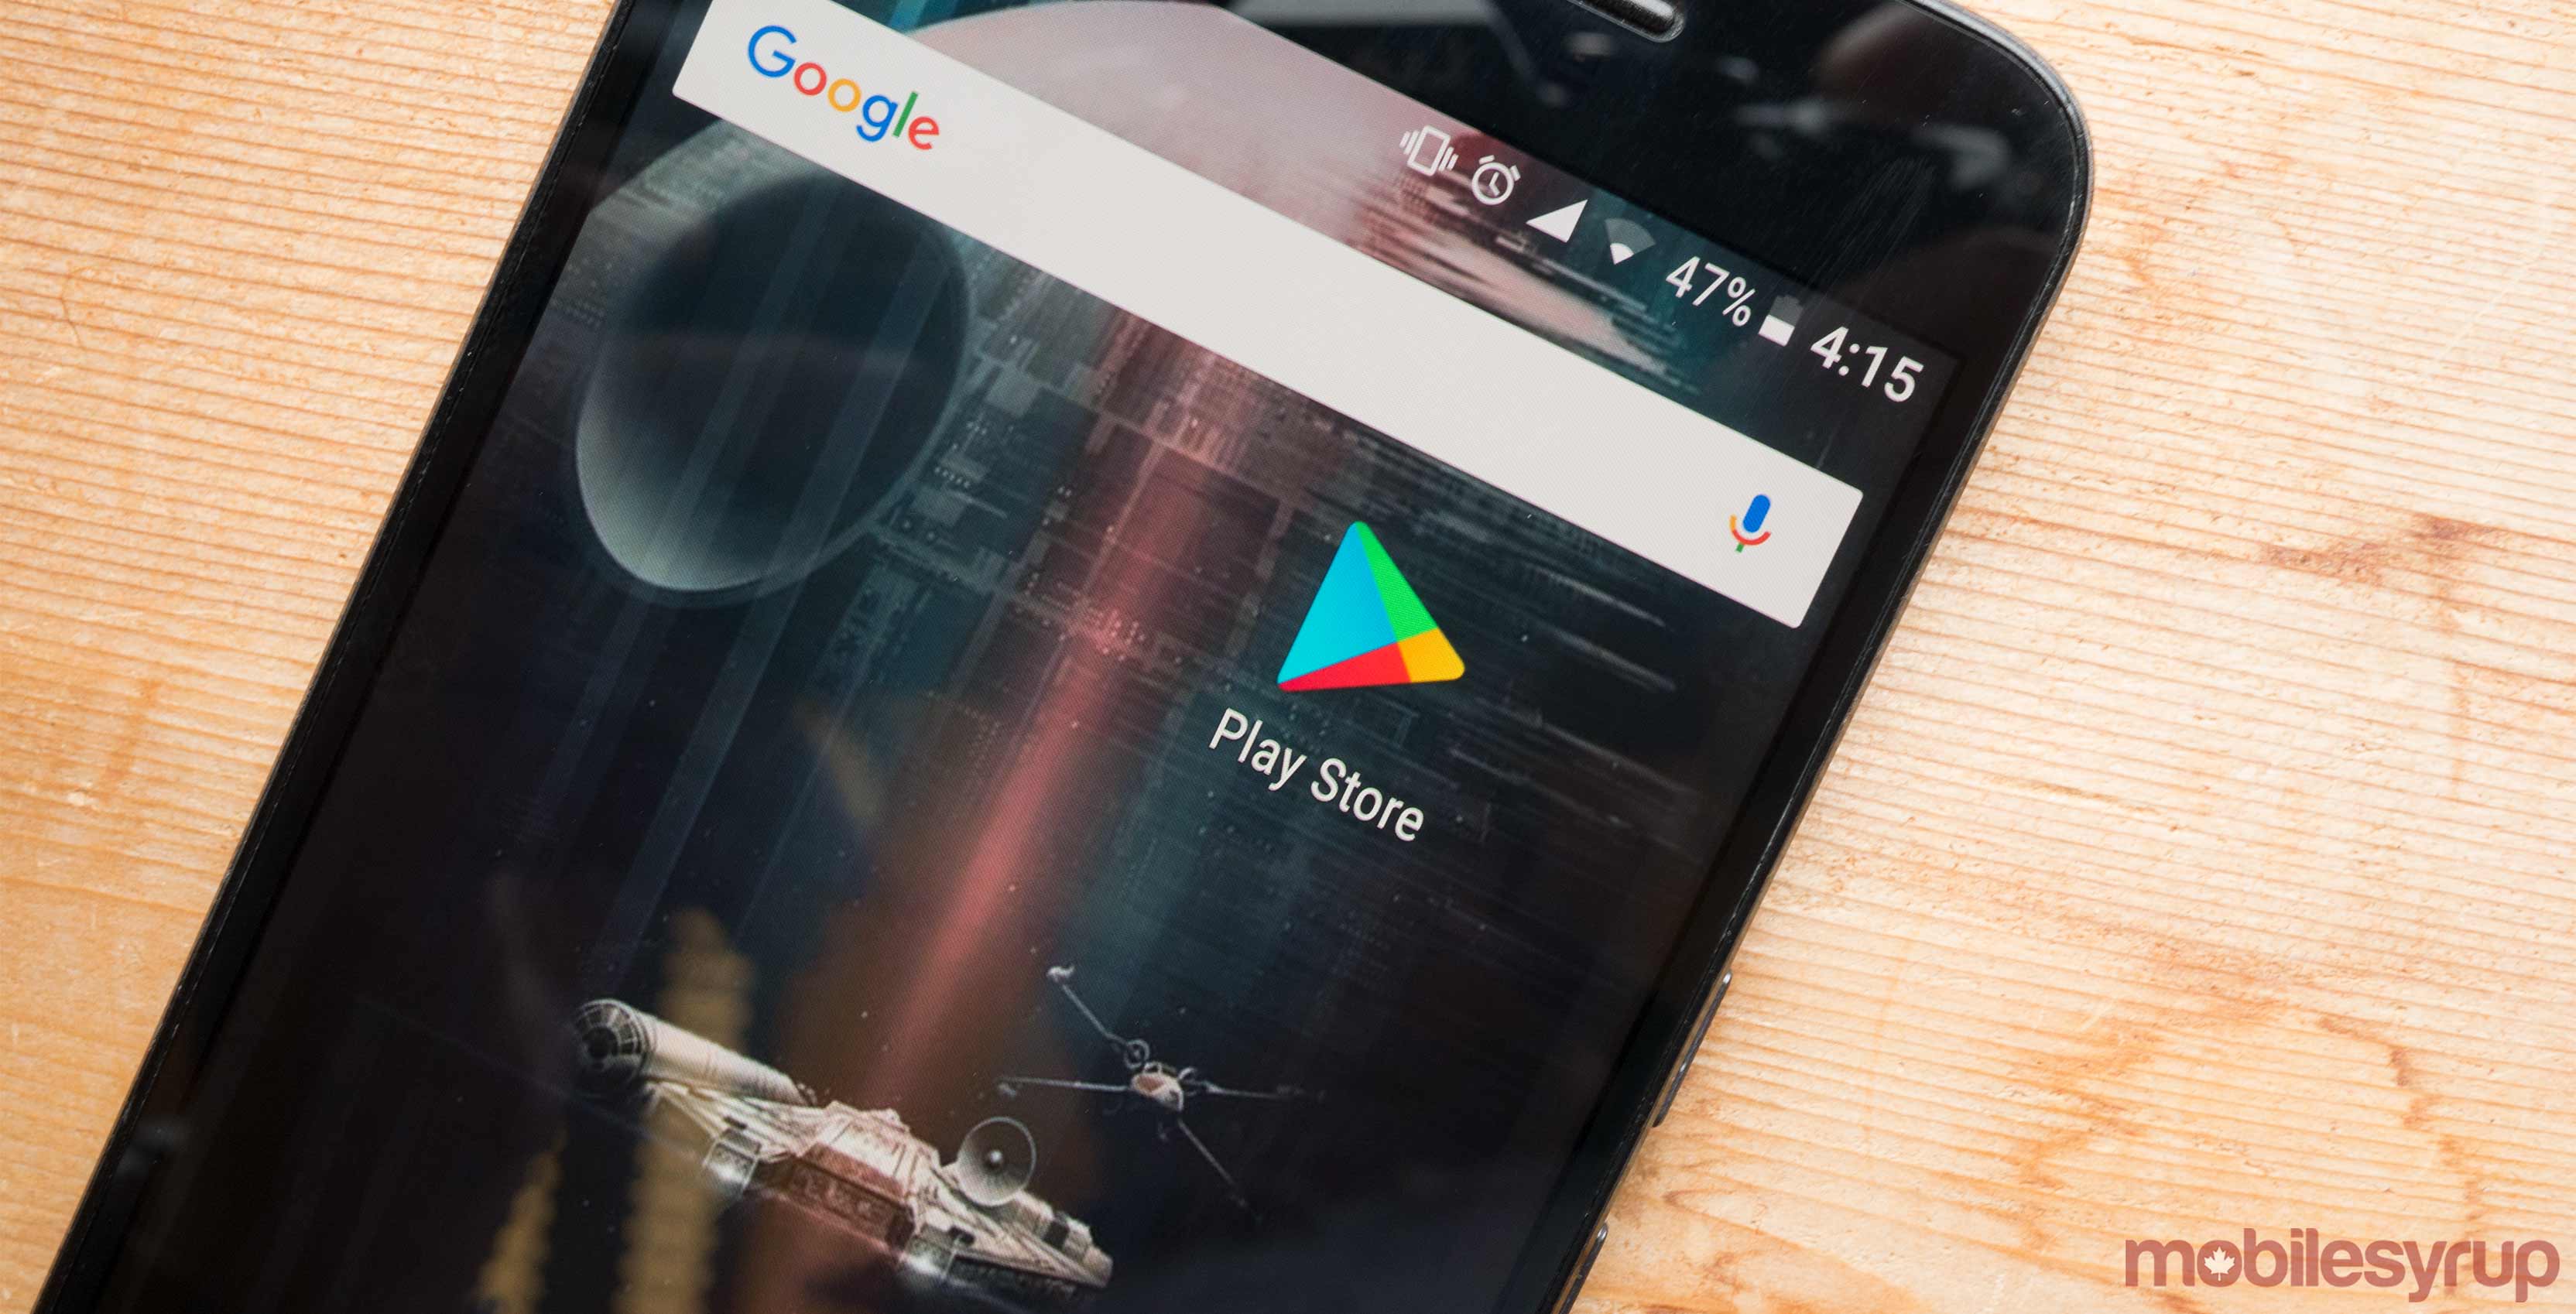 Google Play Store icon on Android phone